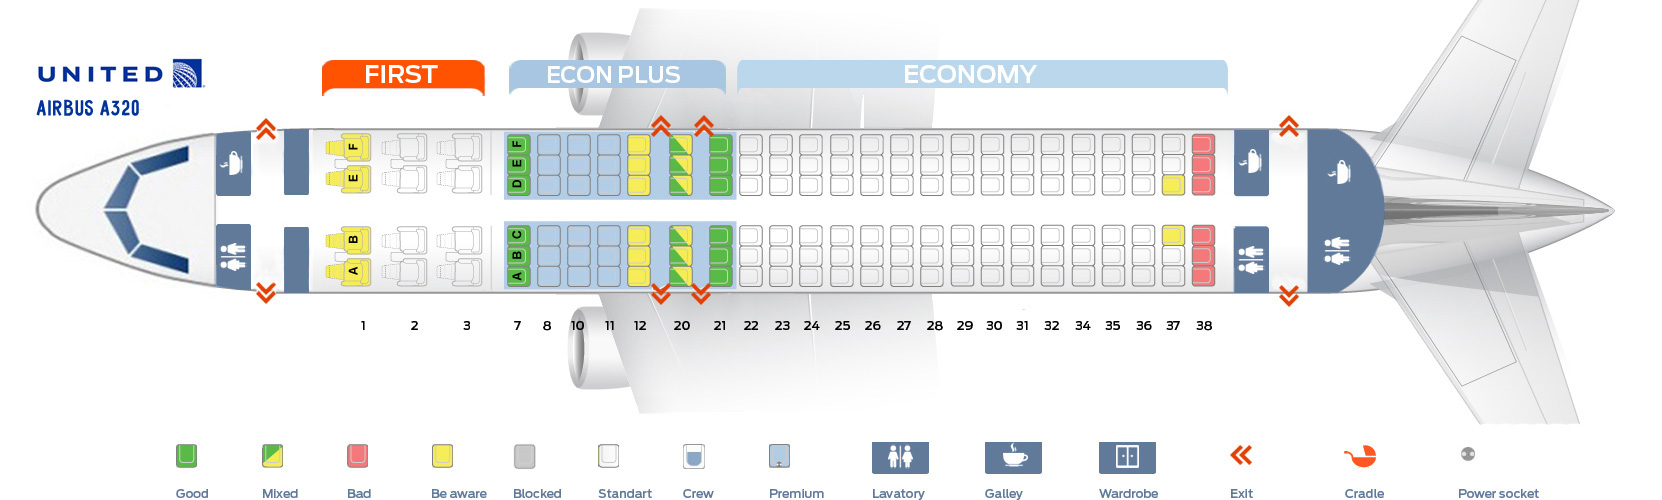 Seat map Airbus A320200 United Airlines. Best seats in plane